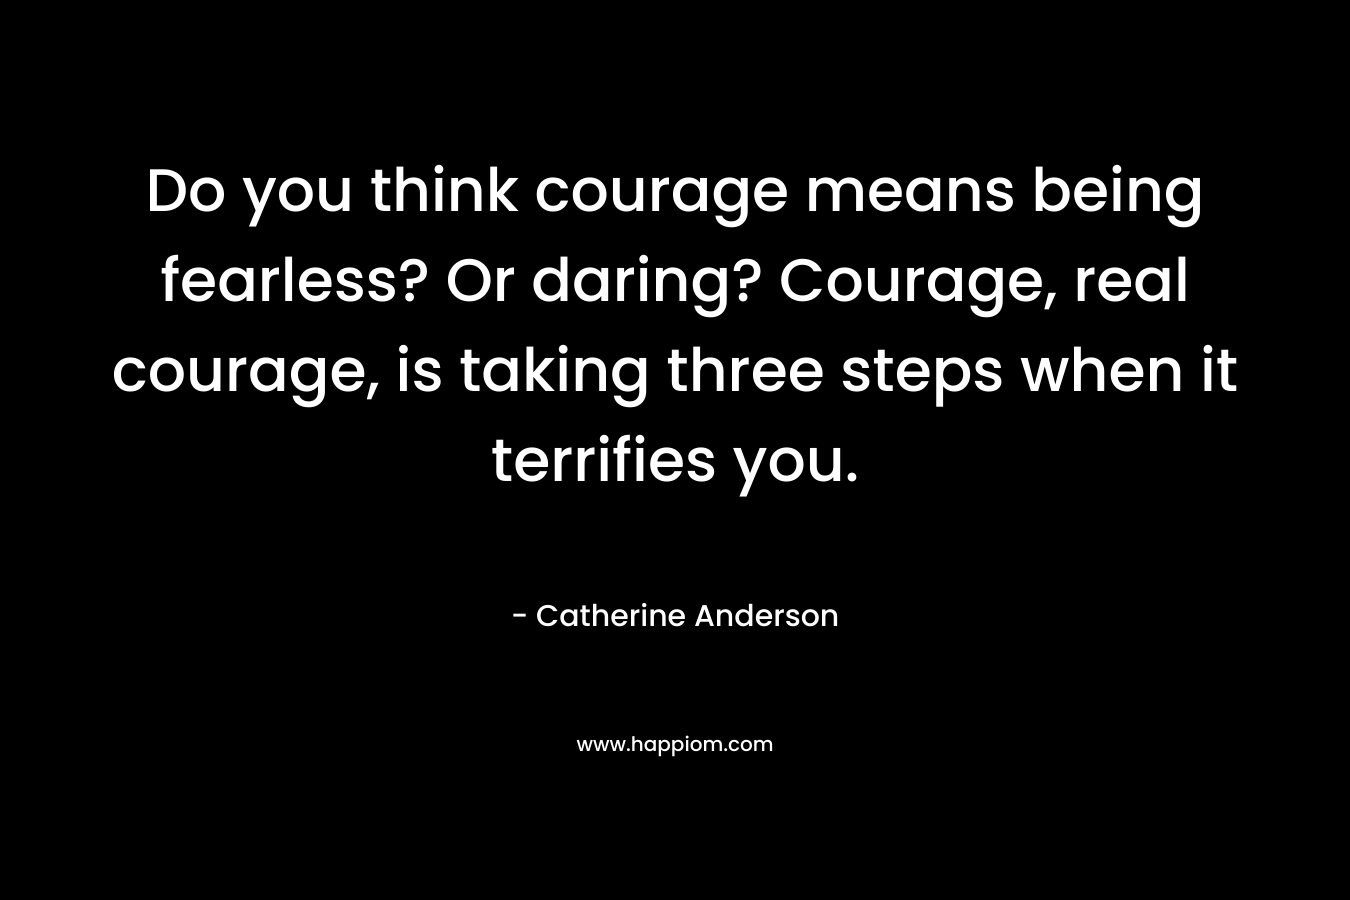 Do you think courage means being fearless? Or daring? Courage, real courage, is taking three steps when it terrifies you. – Catherine Anderson